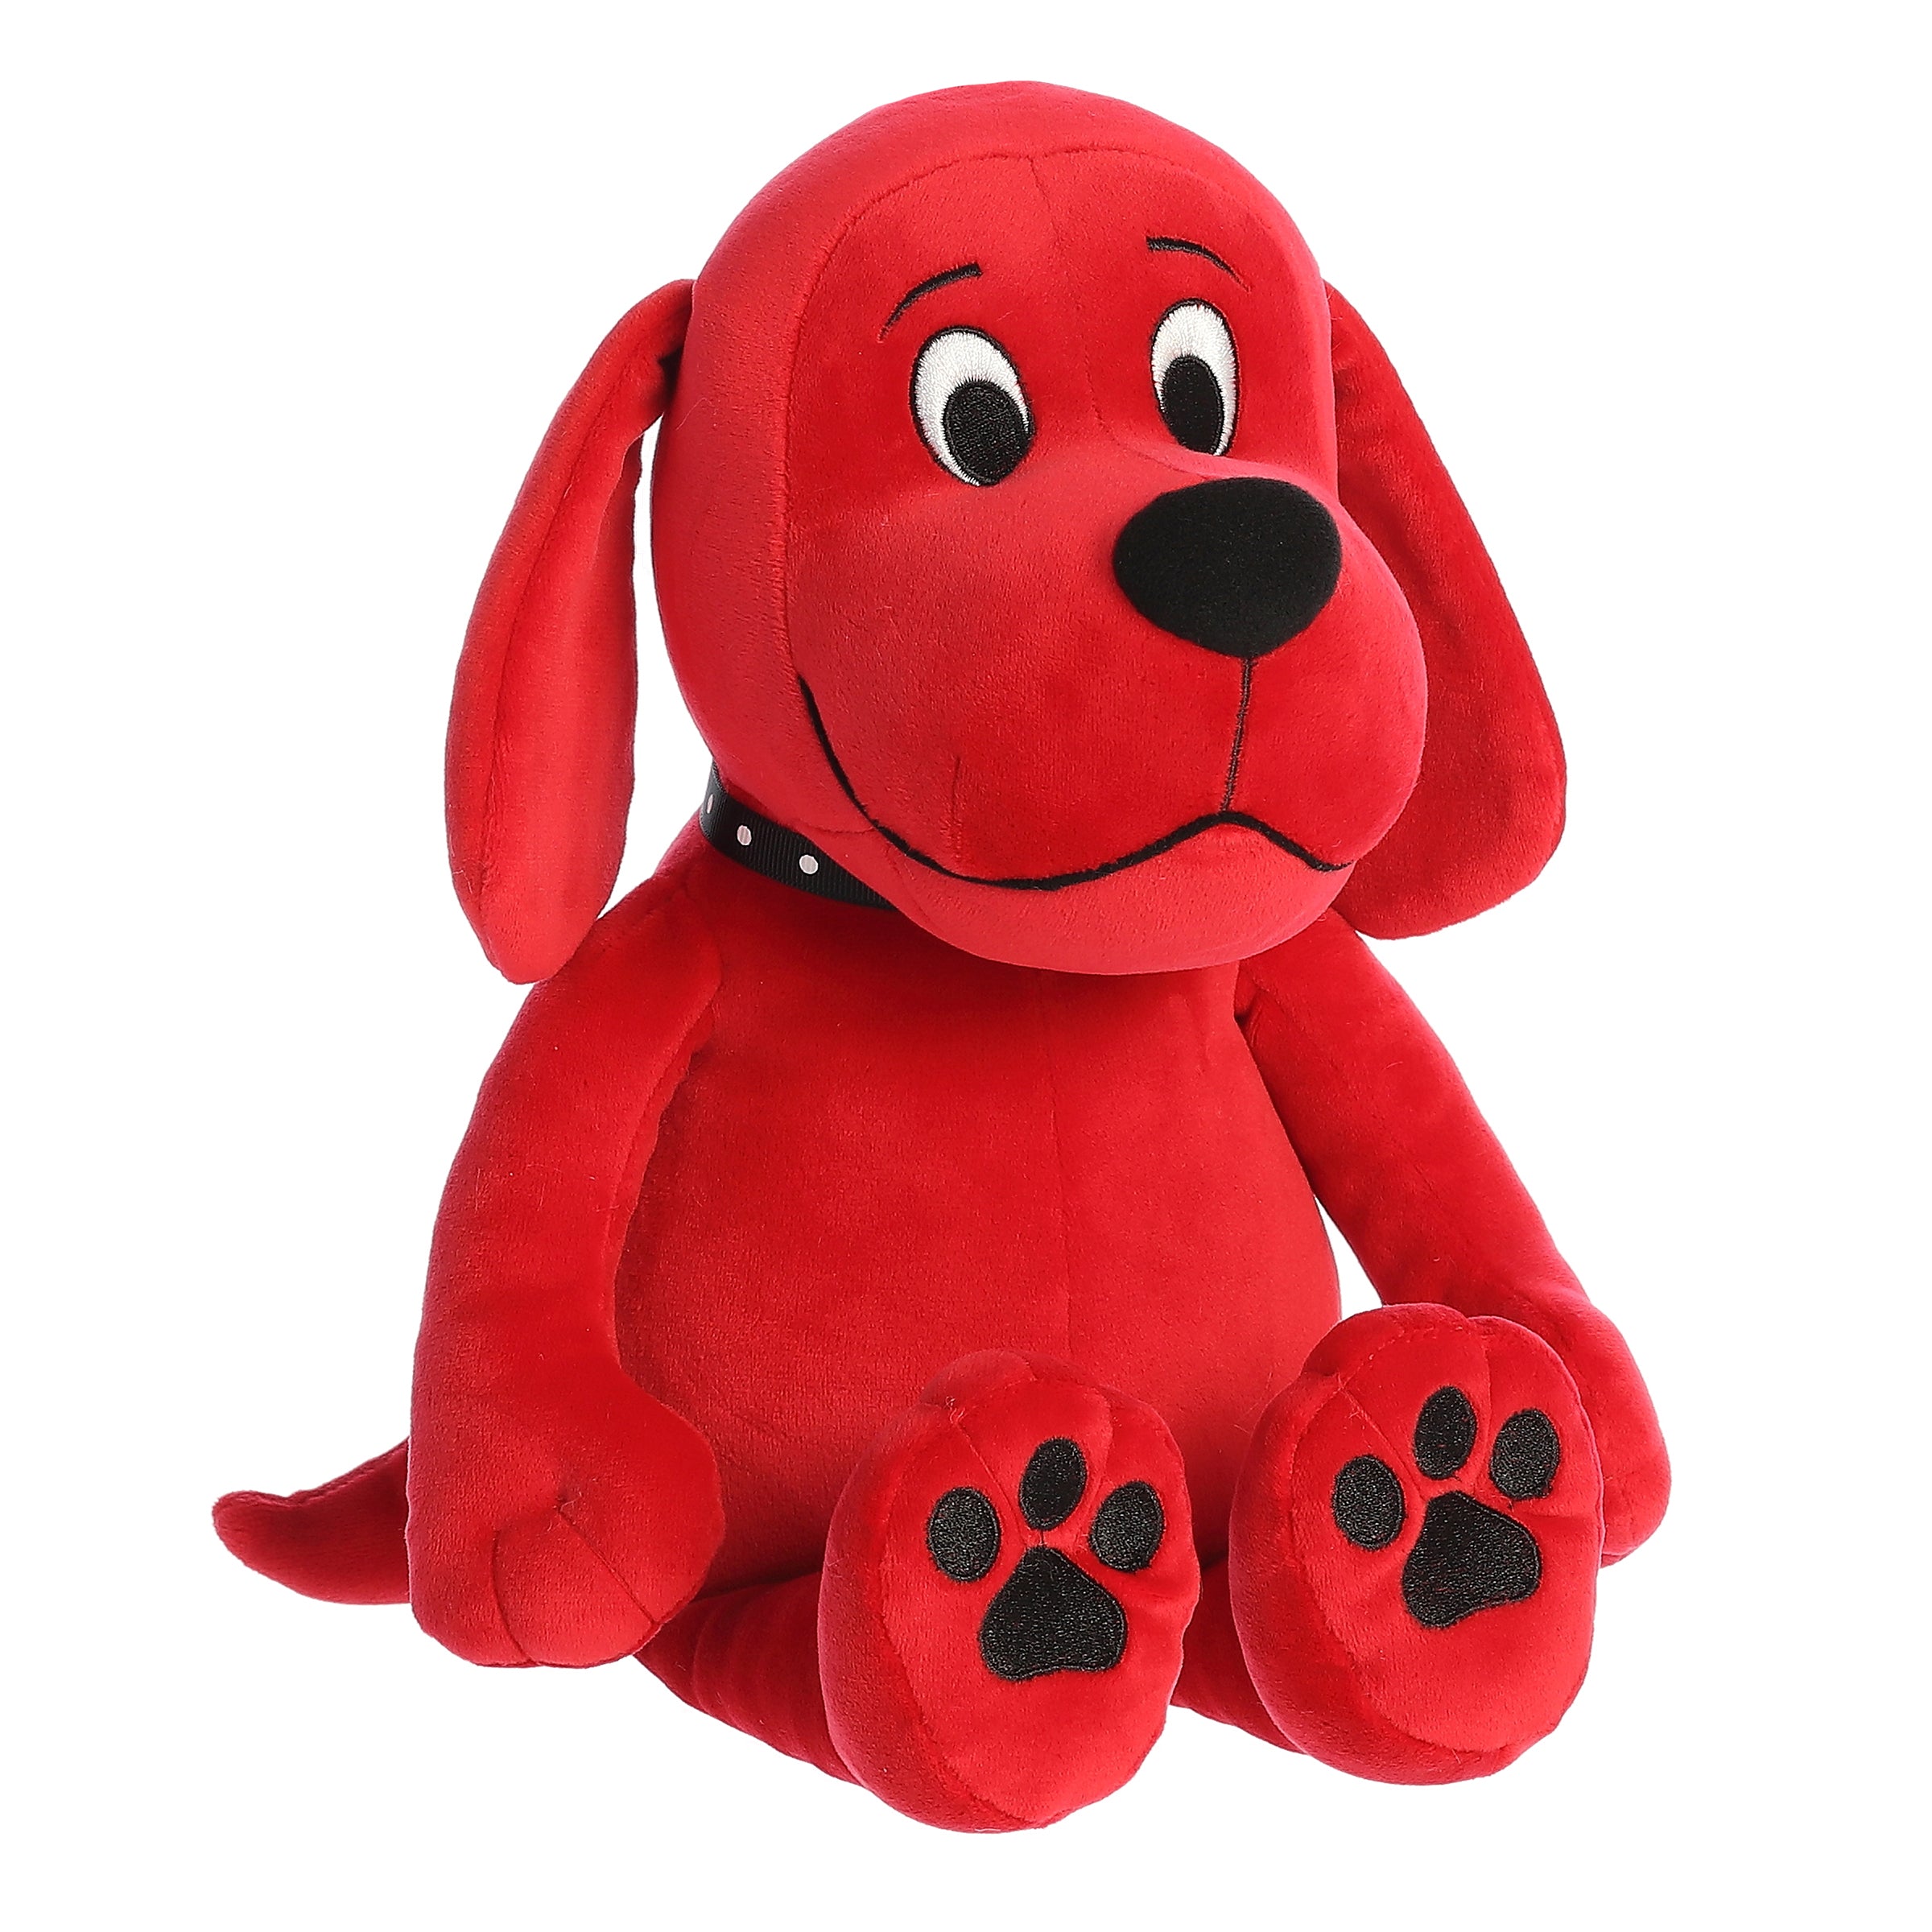 Clifford big red dog plush by Aurora, sporting his iconic red hue and black studded collar, in a patient seated position.